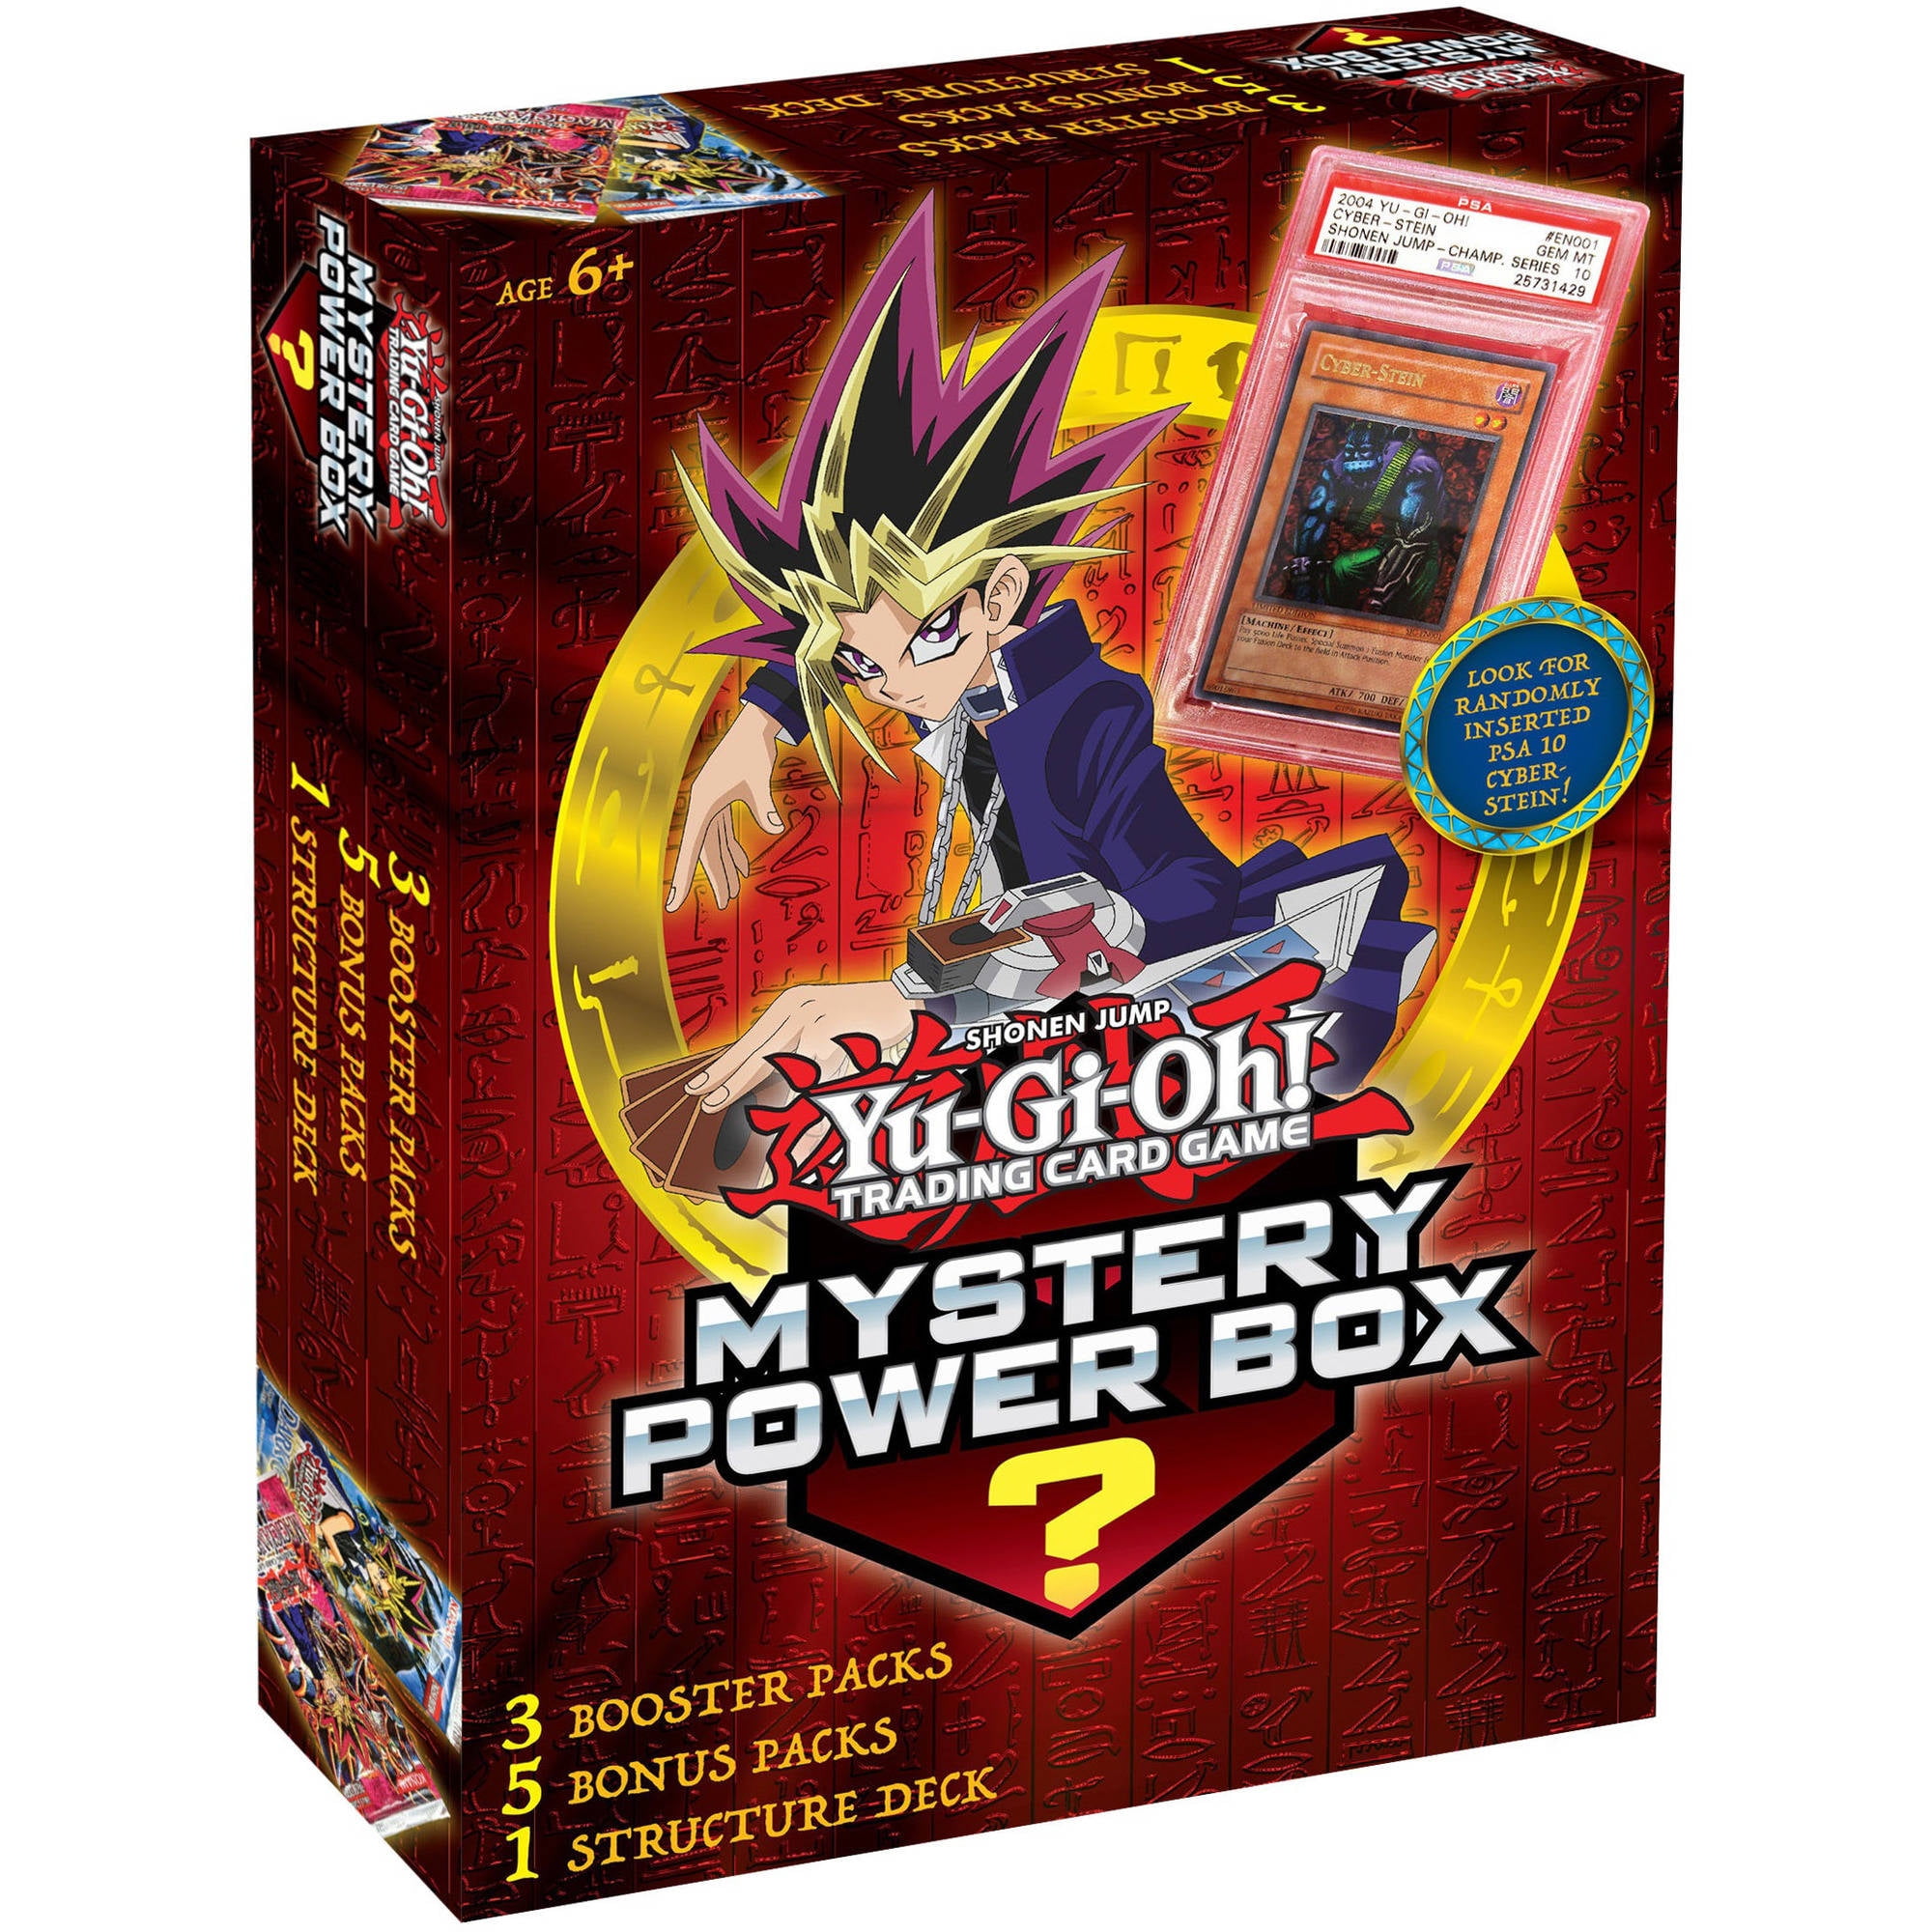 *1x OTS tournament Pack Guarantied* Yugioh Mystery Box Seald Booster Packs